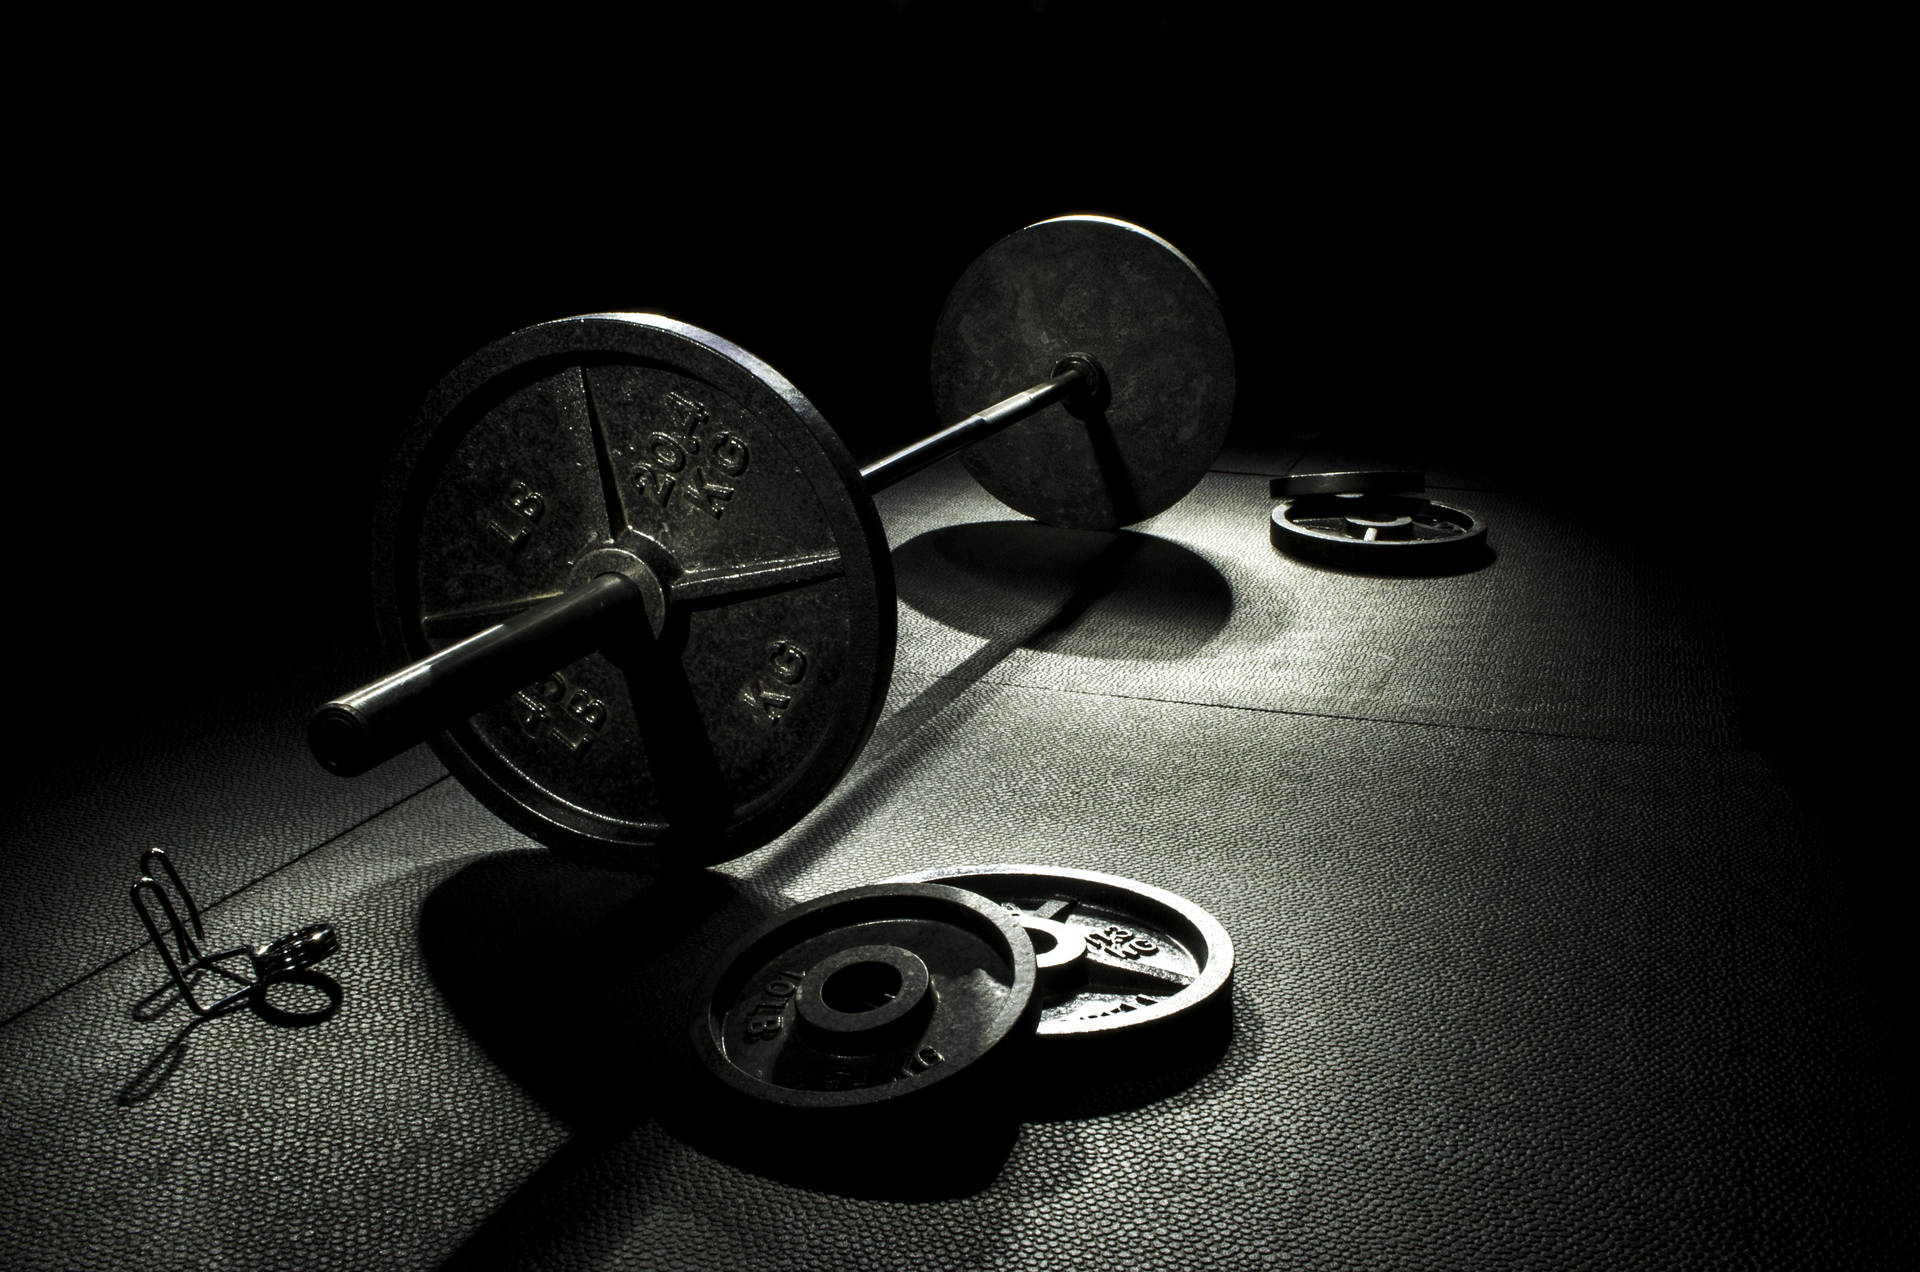 Free Barbell Wallpaper Downloads, Barbell Wallpaper for FREE